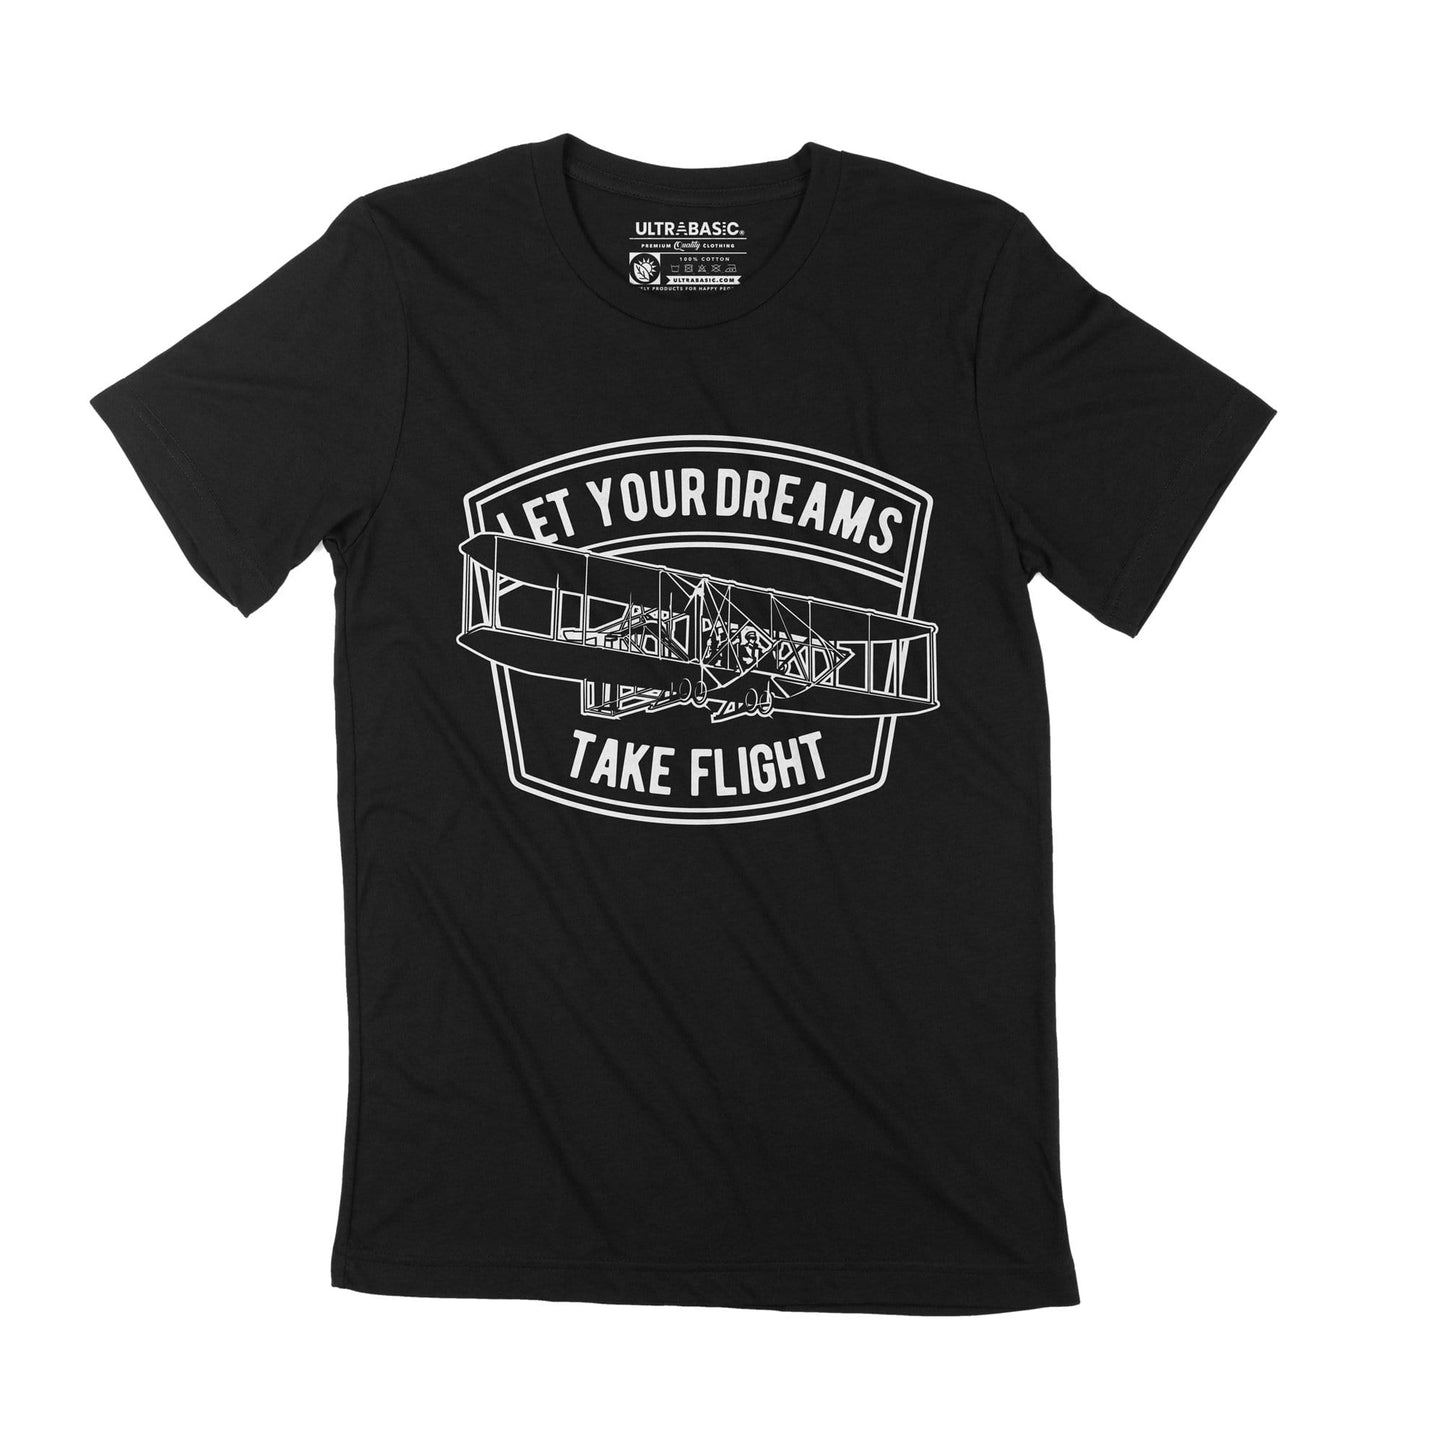 ULTRABASIC Men's T-Shirt Let Your Dreams Take Flight - Gliding Aviation Tee air sport lover aircraft aviator sky airplane dream inspirational saying adult dad apparel printed tees funny youth ideas merch present fathers day merchandise letter clothing christmas unisex classic teens casual print outdoor slogan retro 